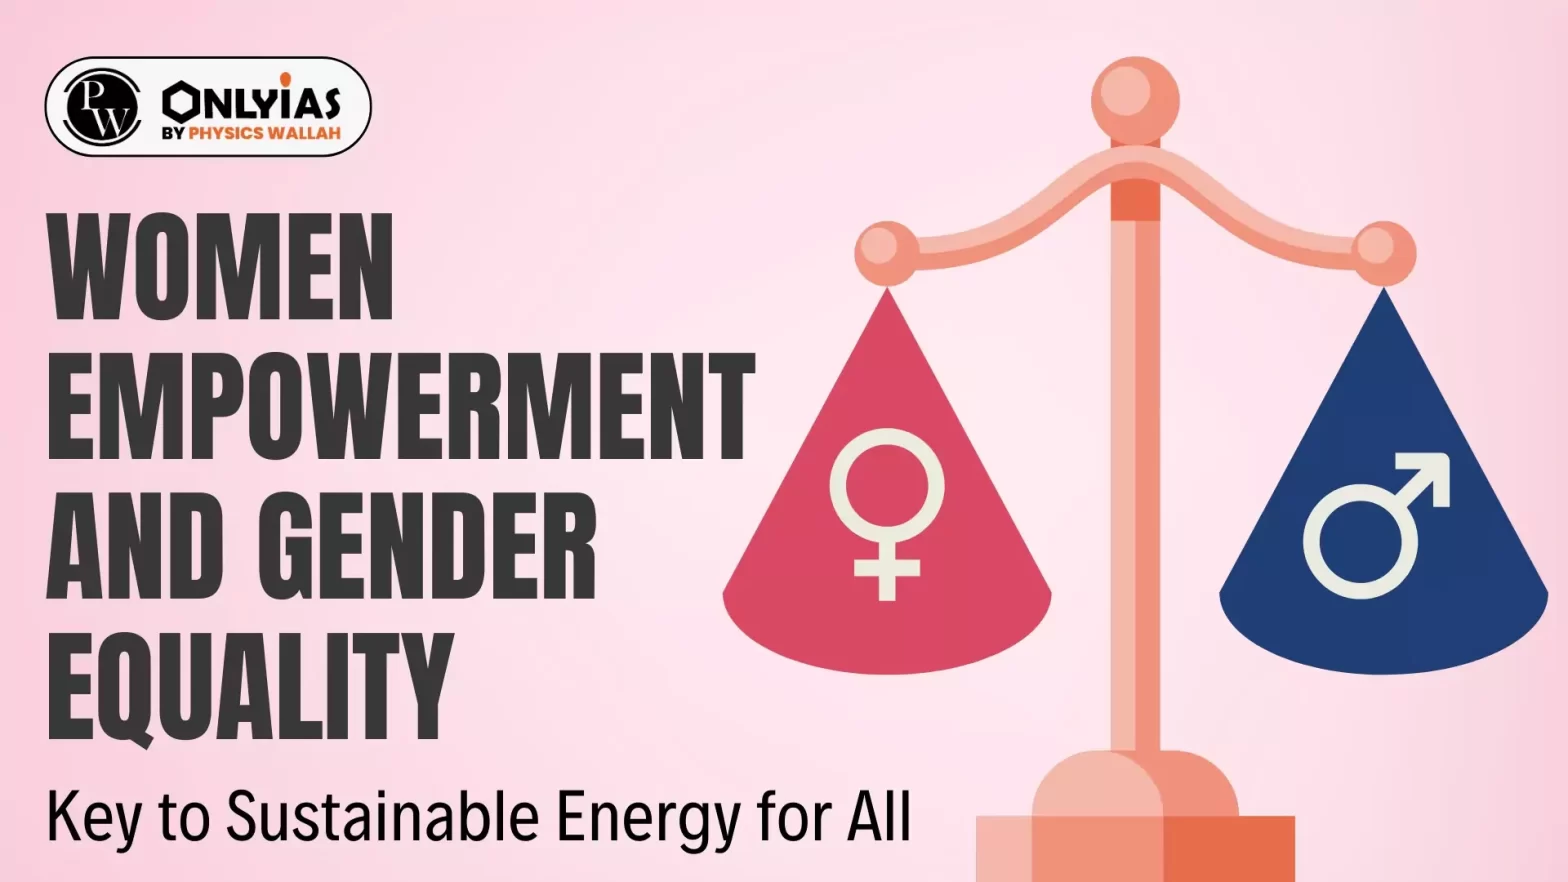 Women Empowerment and Gender Equality: Key to Sustainable Energy for All